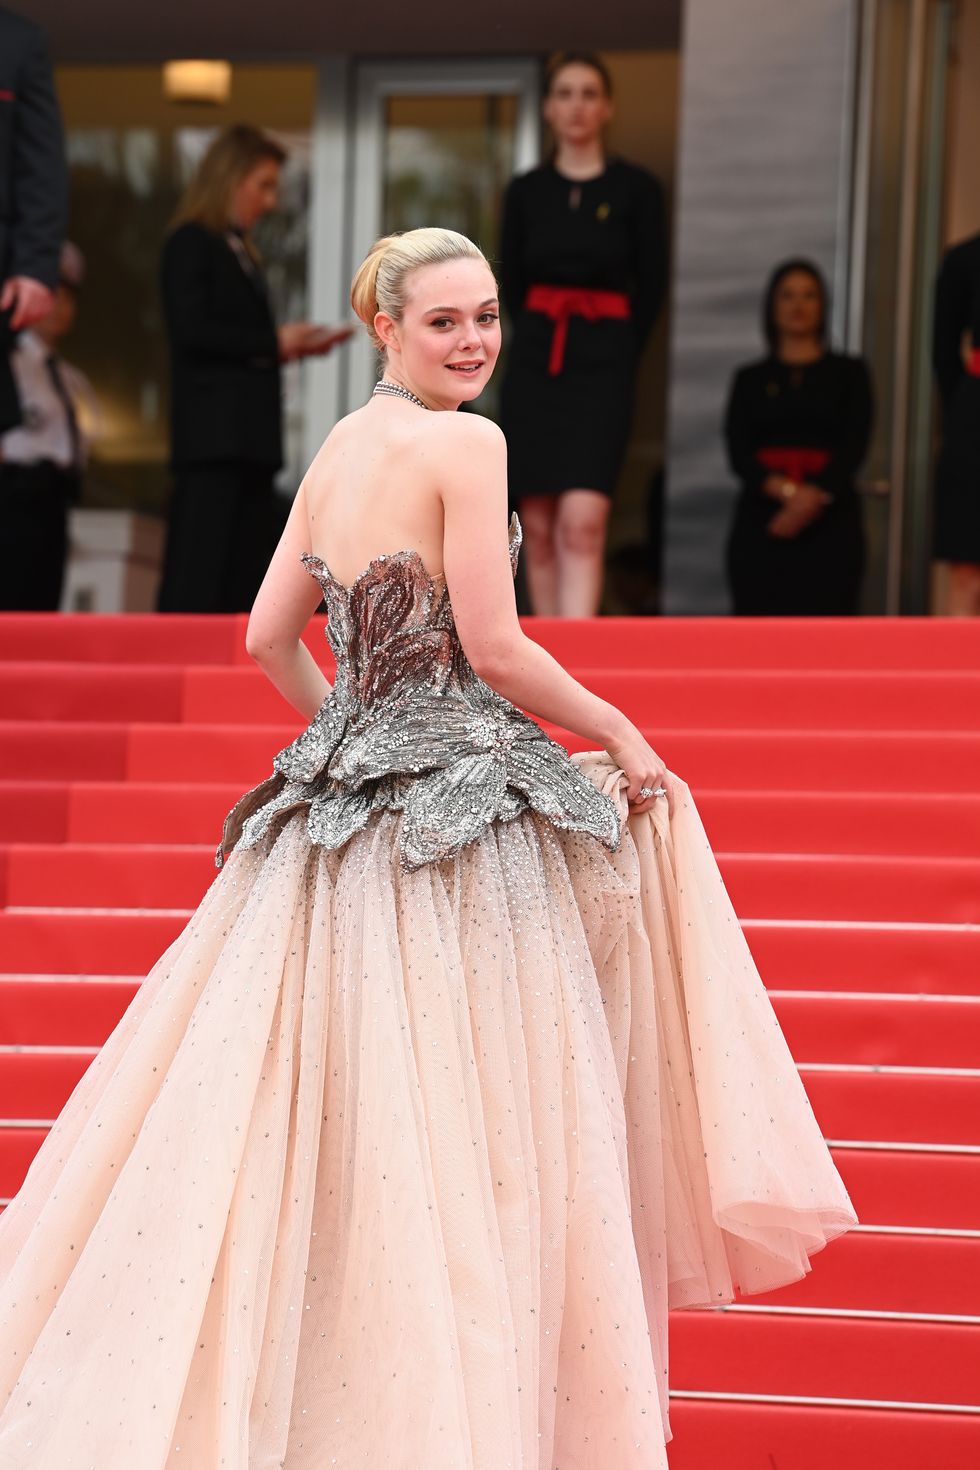 Elle Fanning Wears Blue Dress and Princess Gown at Cannes Film Festival